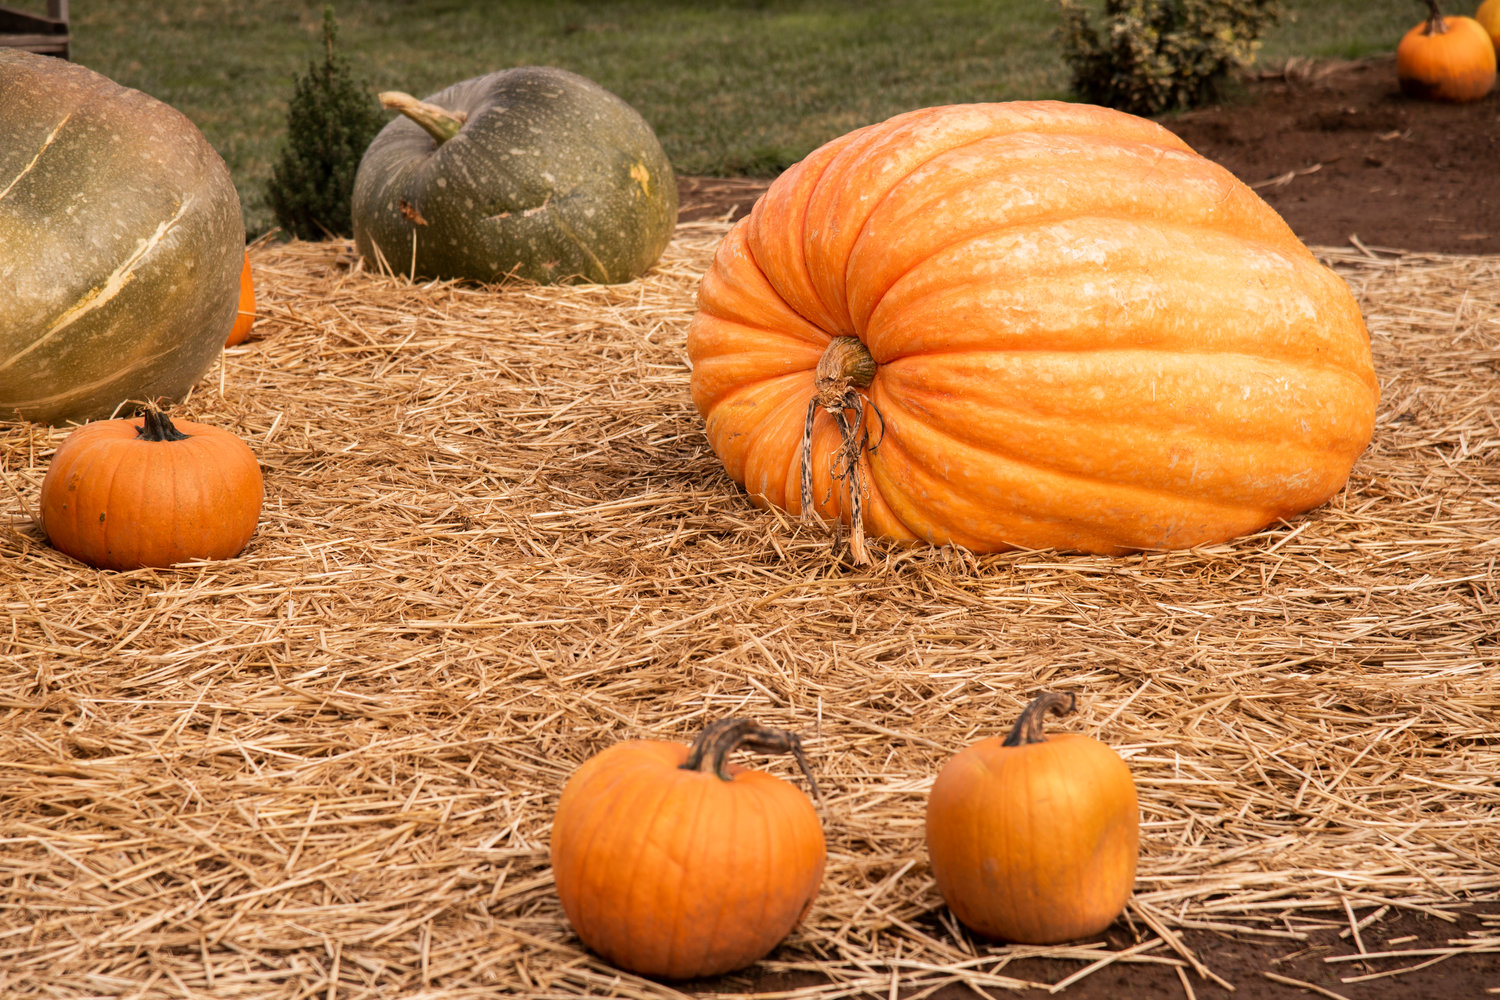 A large pumpkin weighing over 300 pounds sits on display at The Huntting’s Farm in Cinebar on Wednesday.